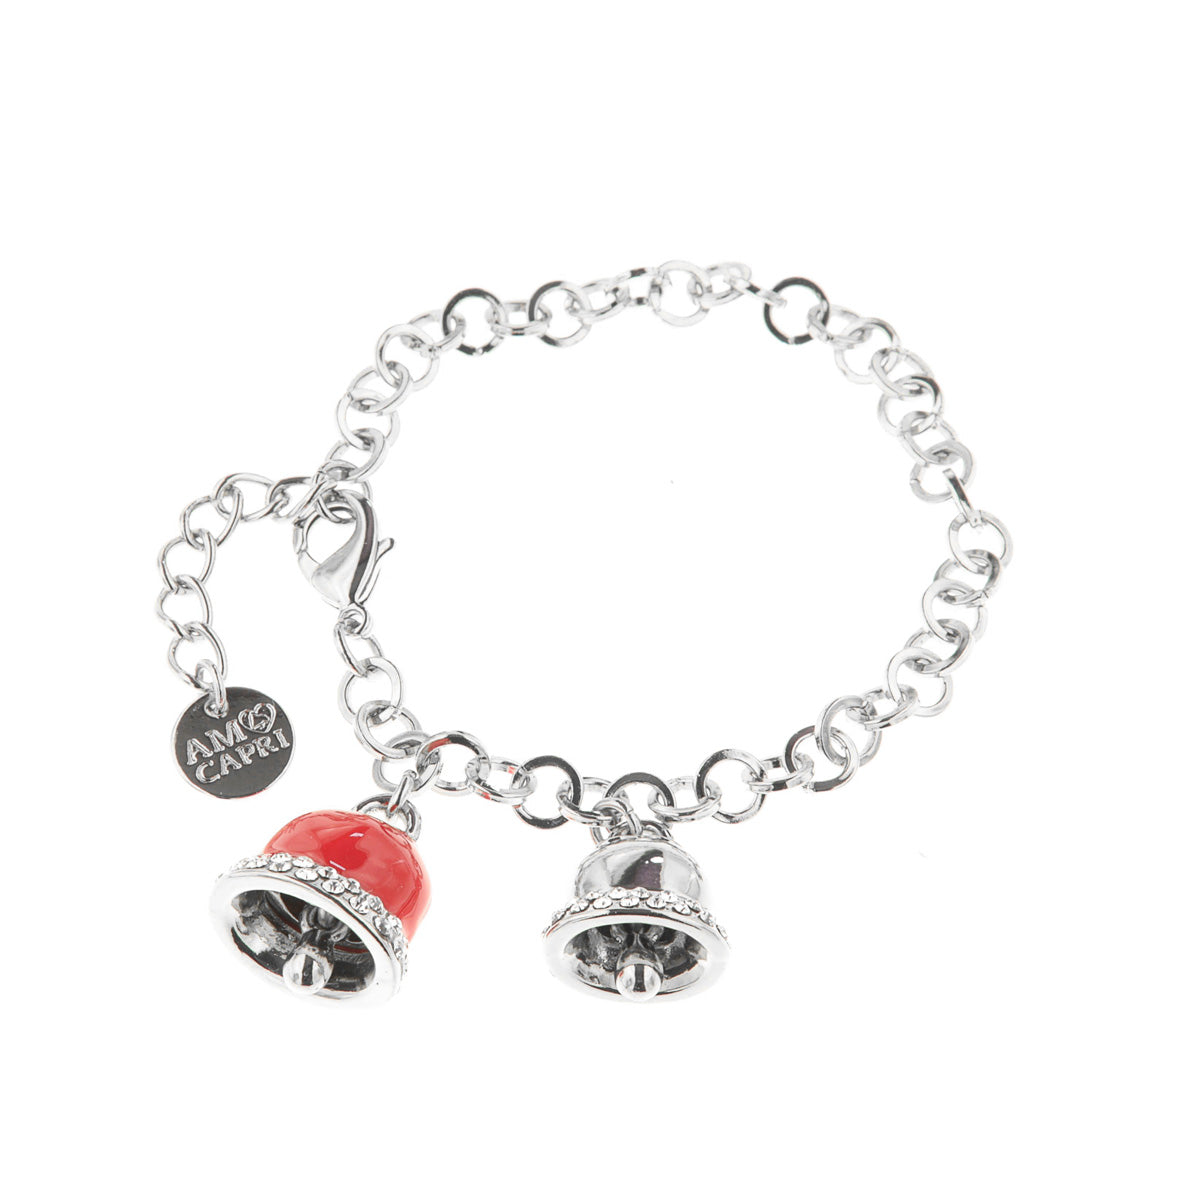 Metal bracelet with red glazed lucky charm and white crystals